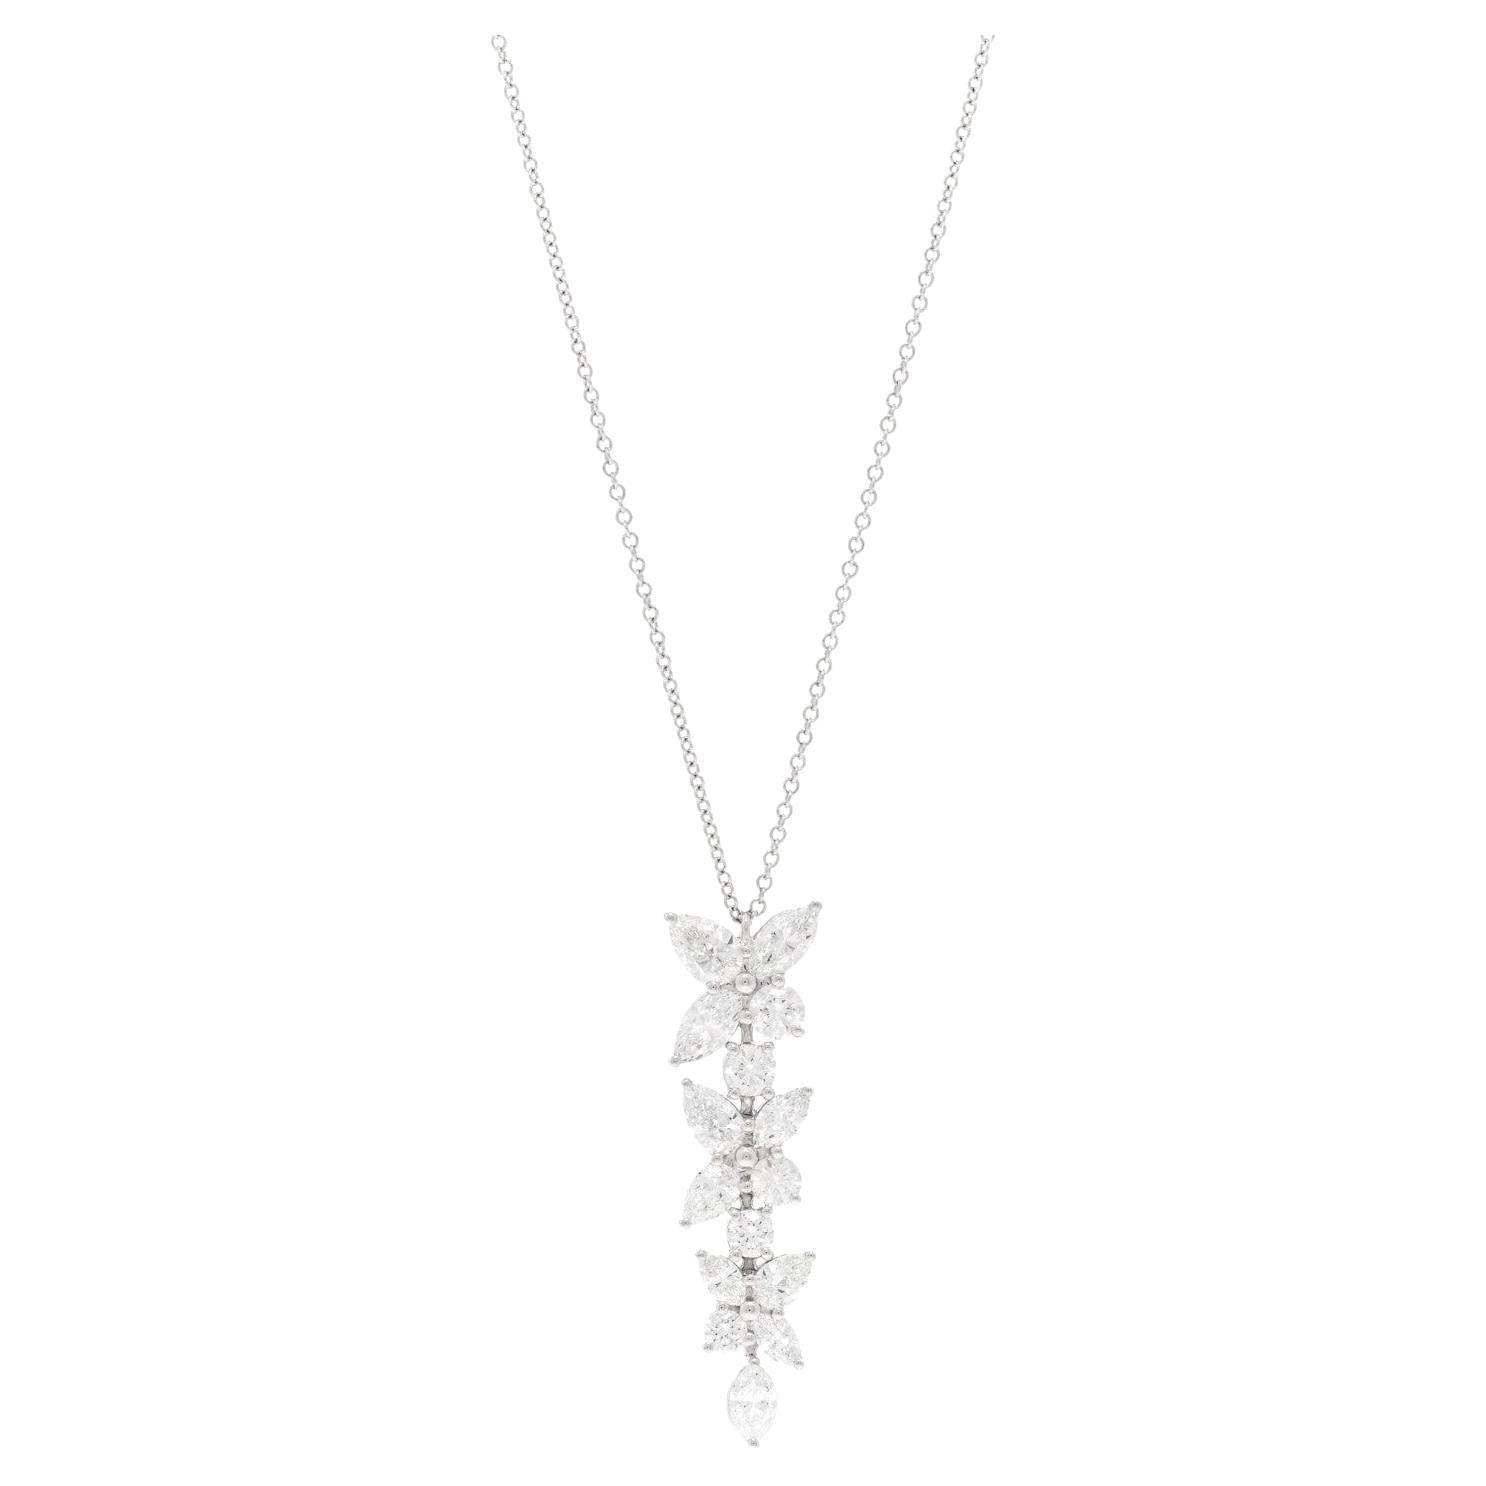 Pre-owned Tiffany & Co. Victora mixed cluster pendant crafted in platinum. The necklace is a playful twist on Tiffany & Co.'s iconic Victoria design featuring a mix of marquise, pear-shaped, and round brilliant cut diamonds of an estimated 2.12